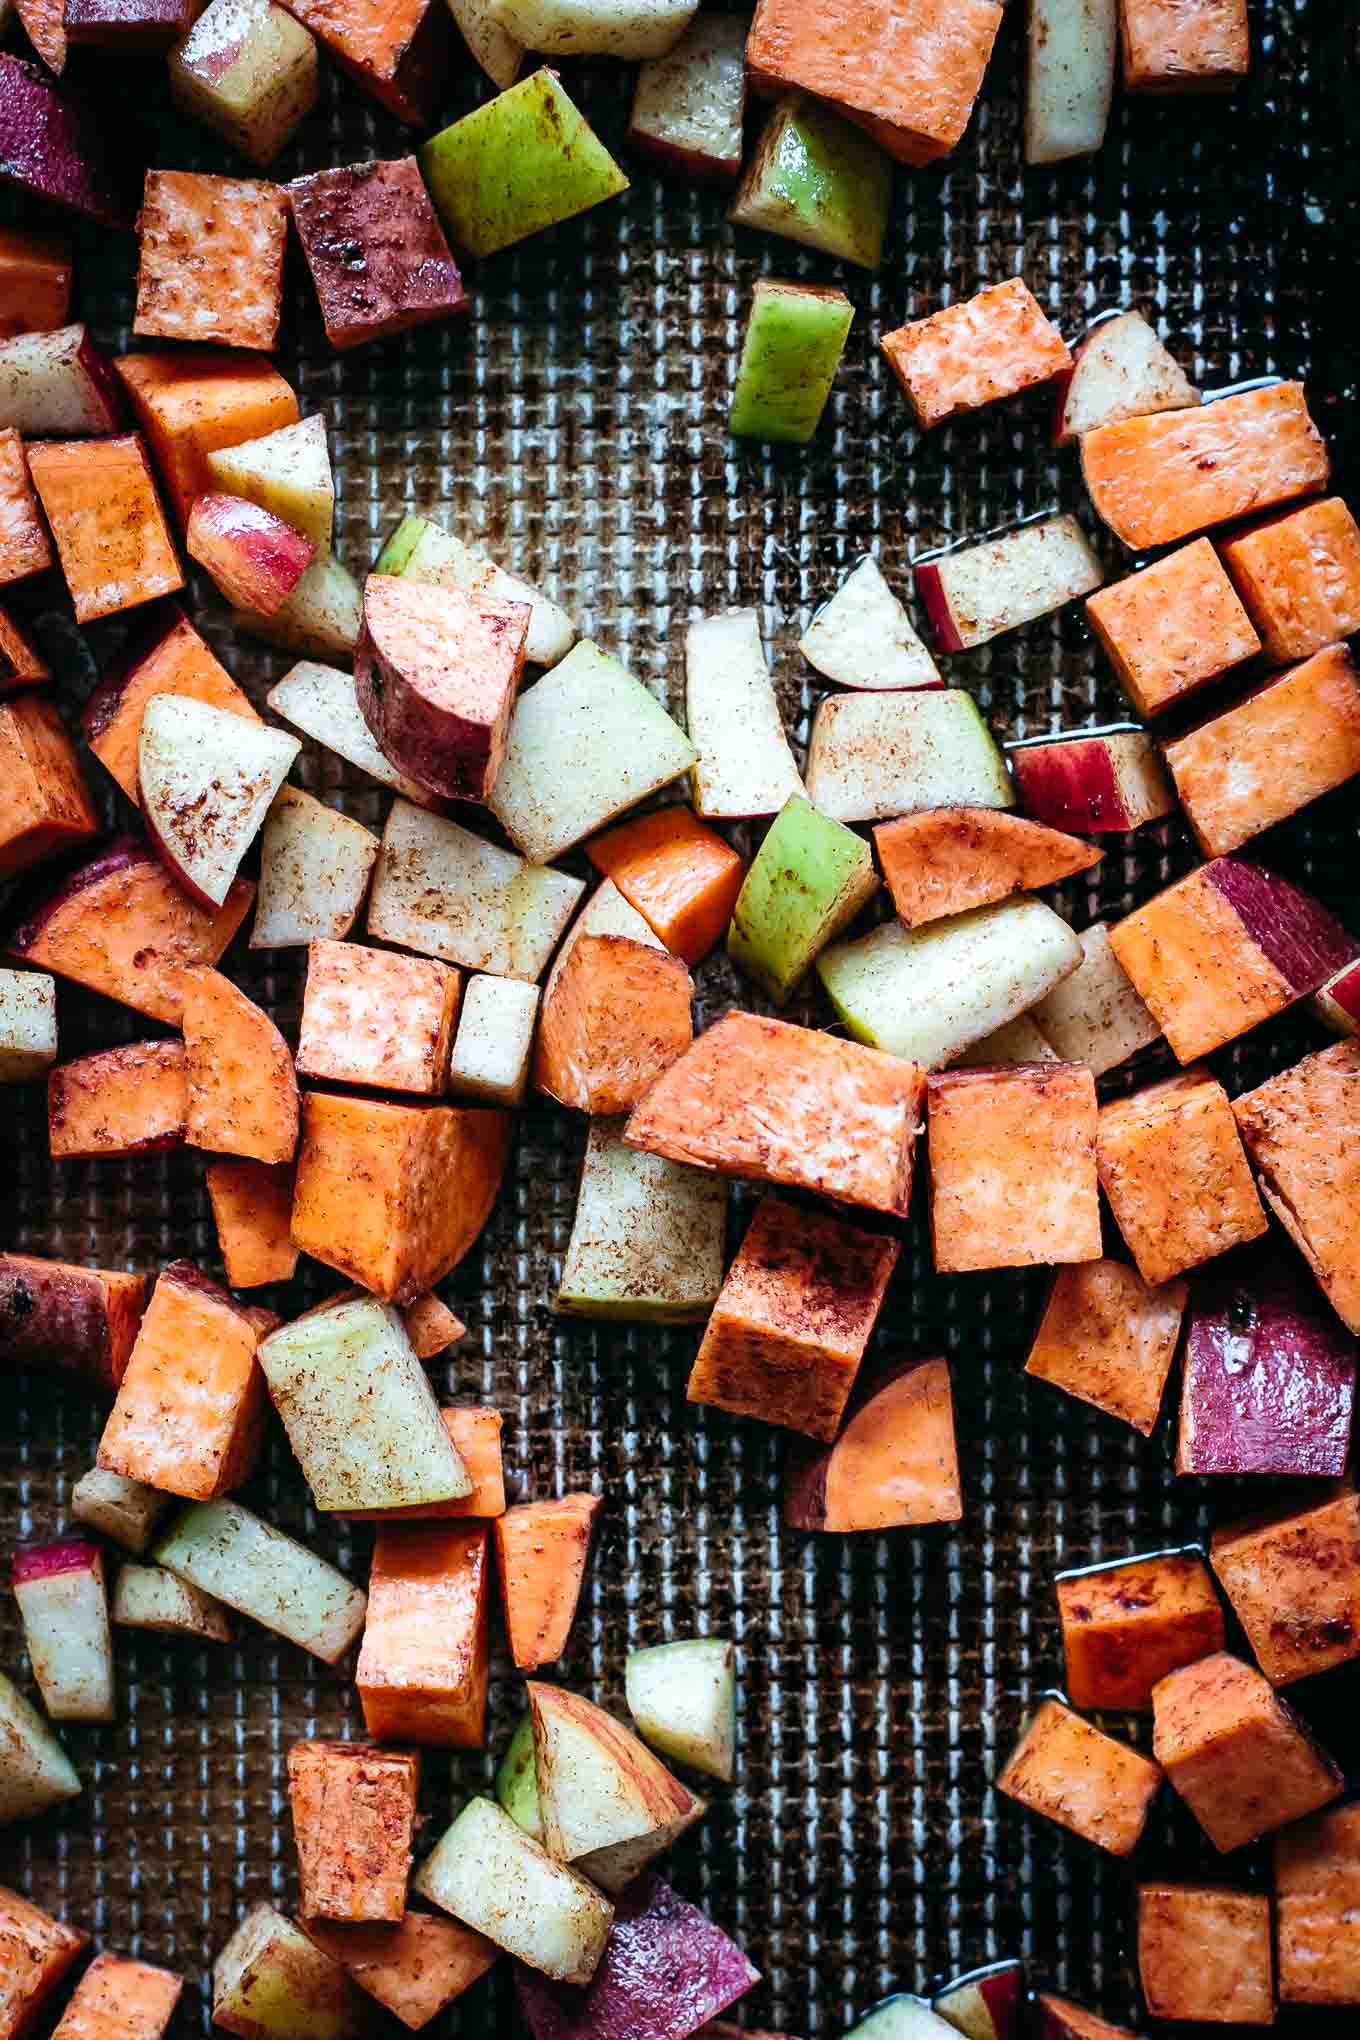 cubed sweet potatoes and apples on a roasting pan before baking